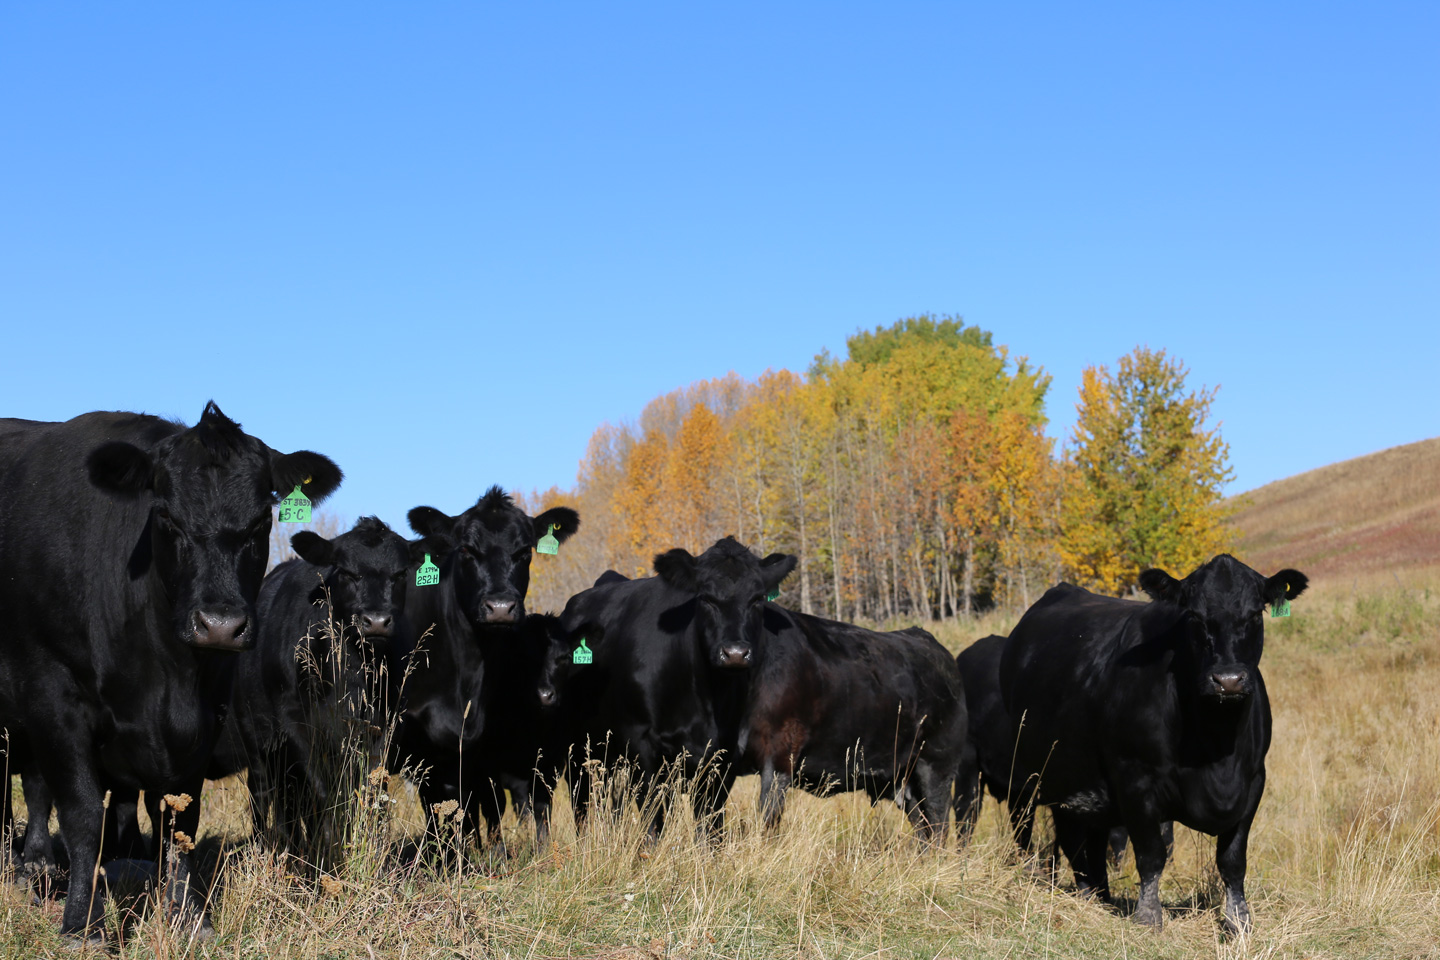 Cows and Heifers